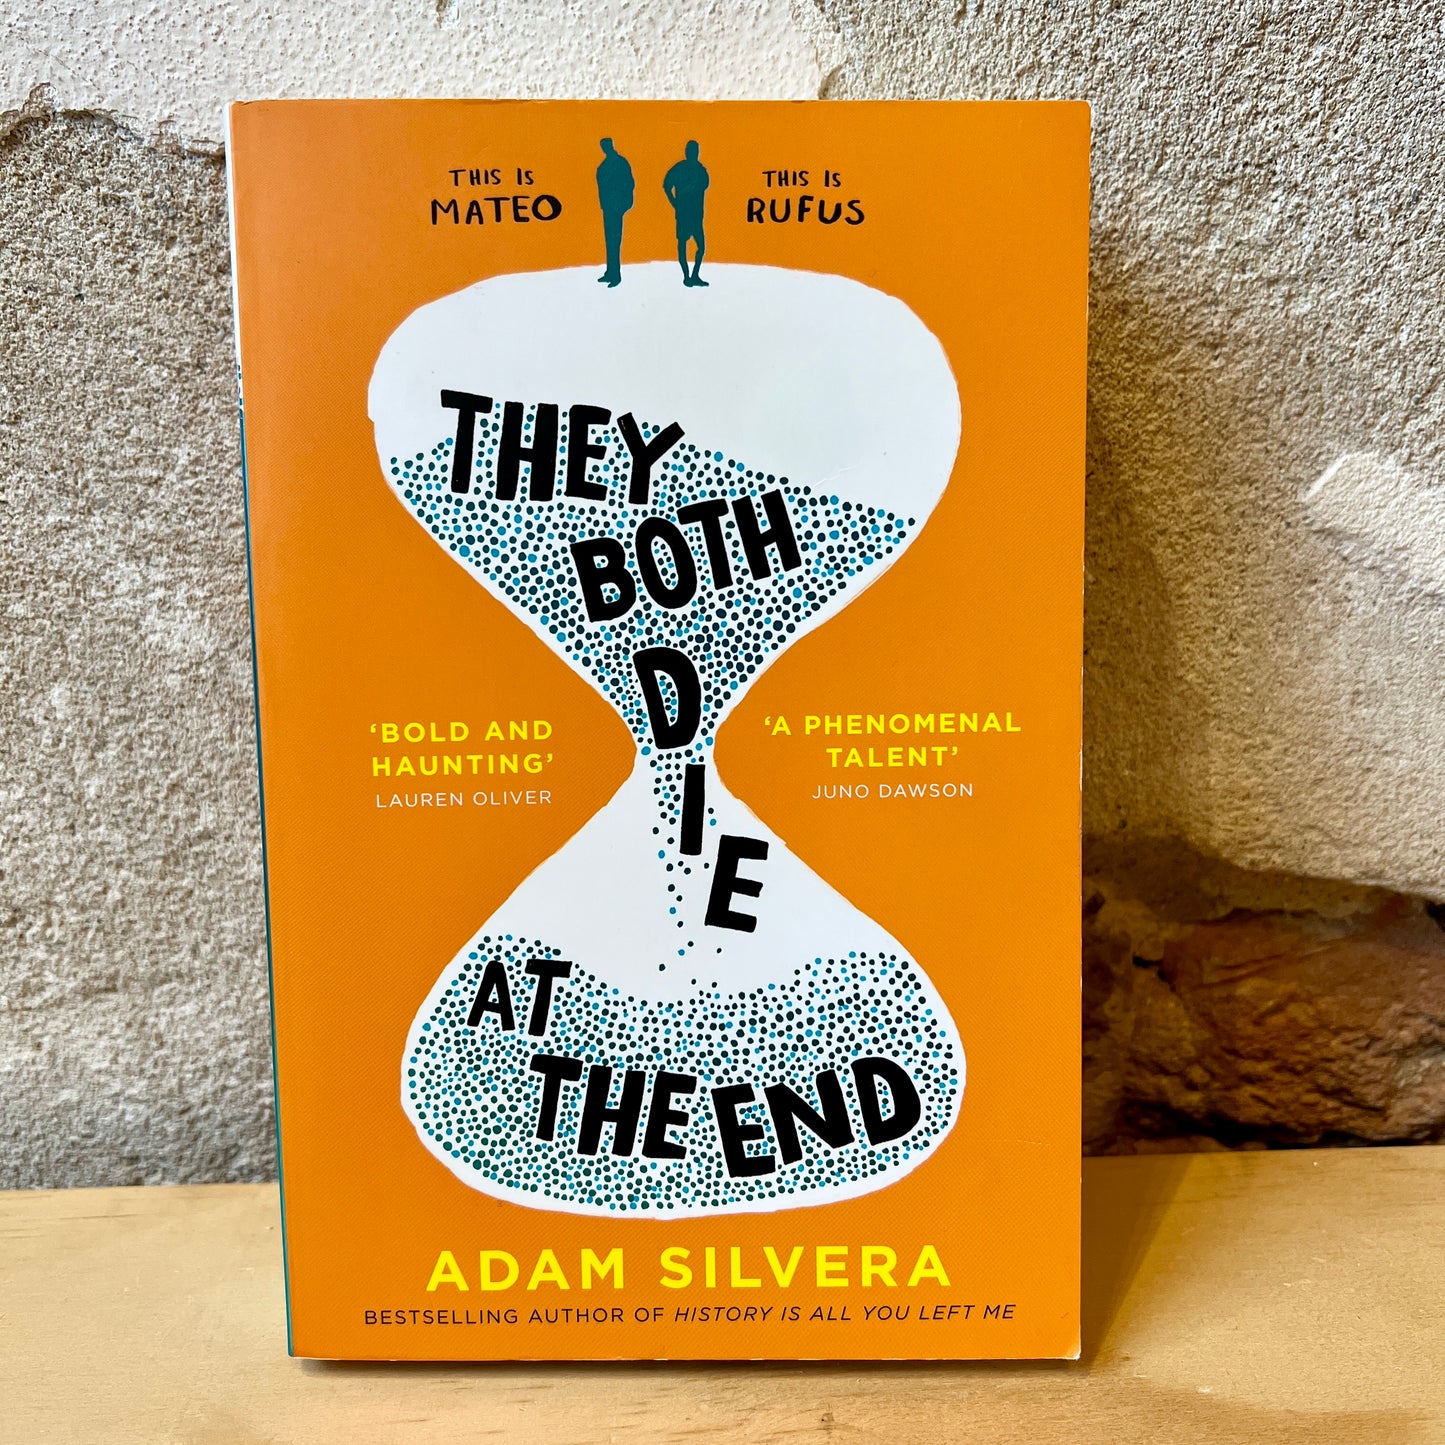 They Both Die At The End – Adam Silvera